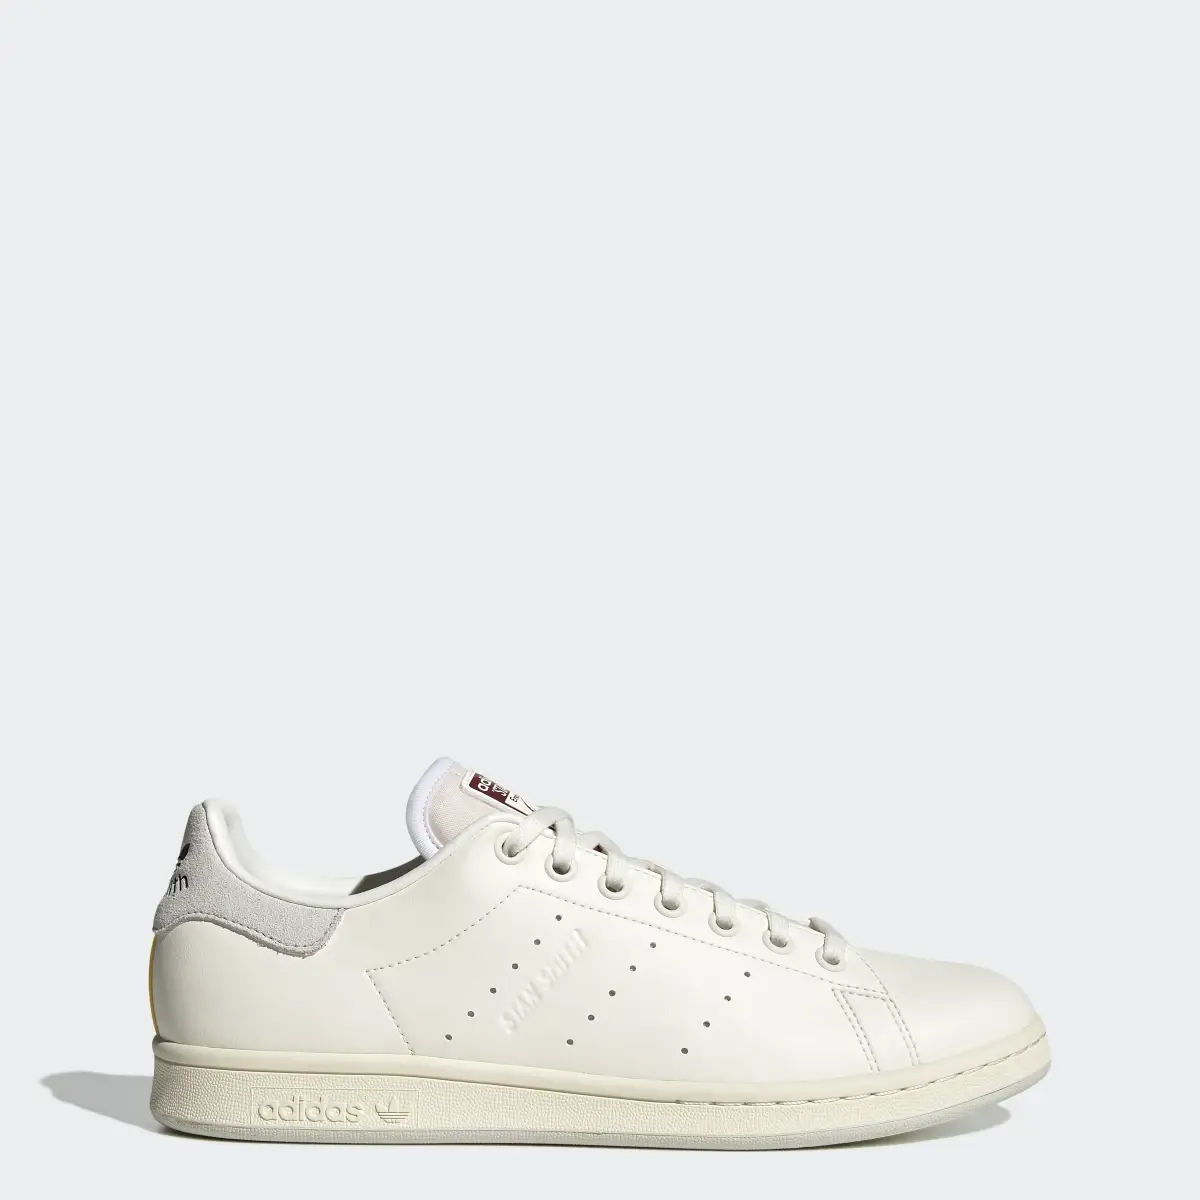 Adidas Stanniversary Stan Smith Shoes. 1